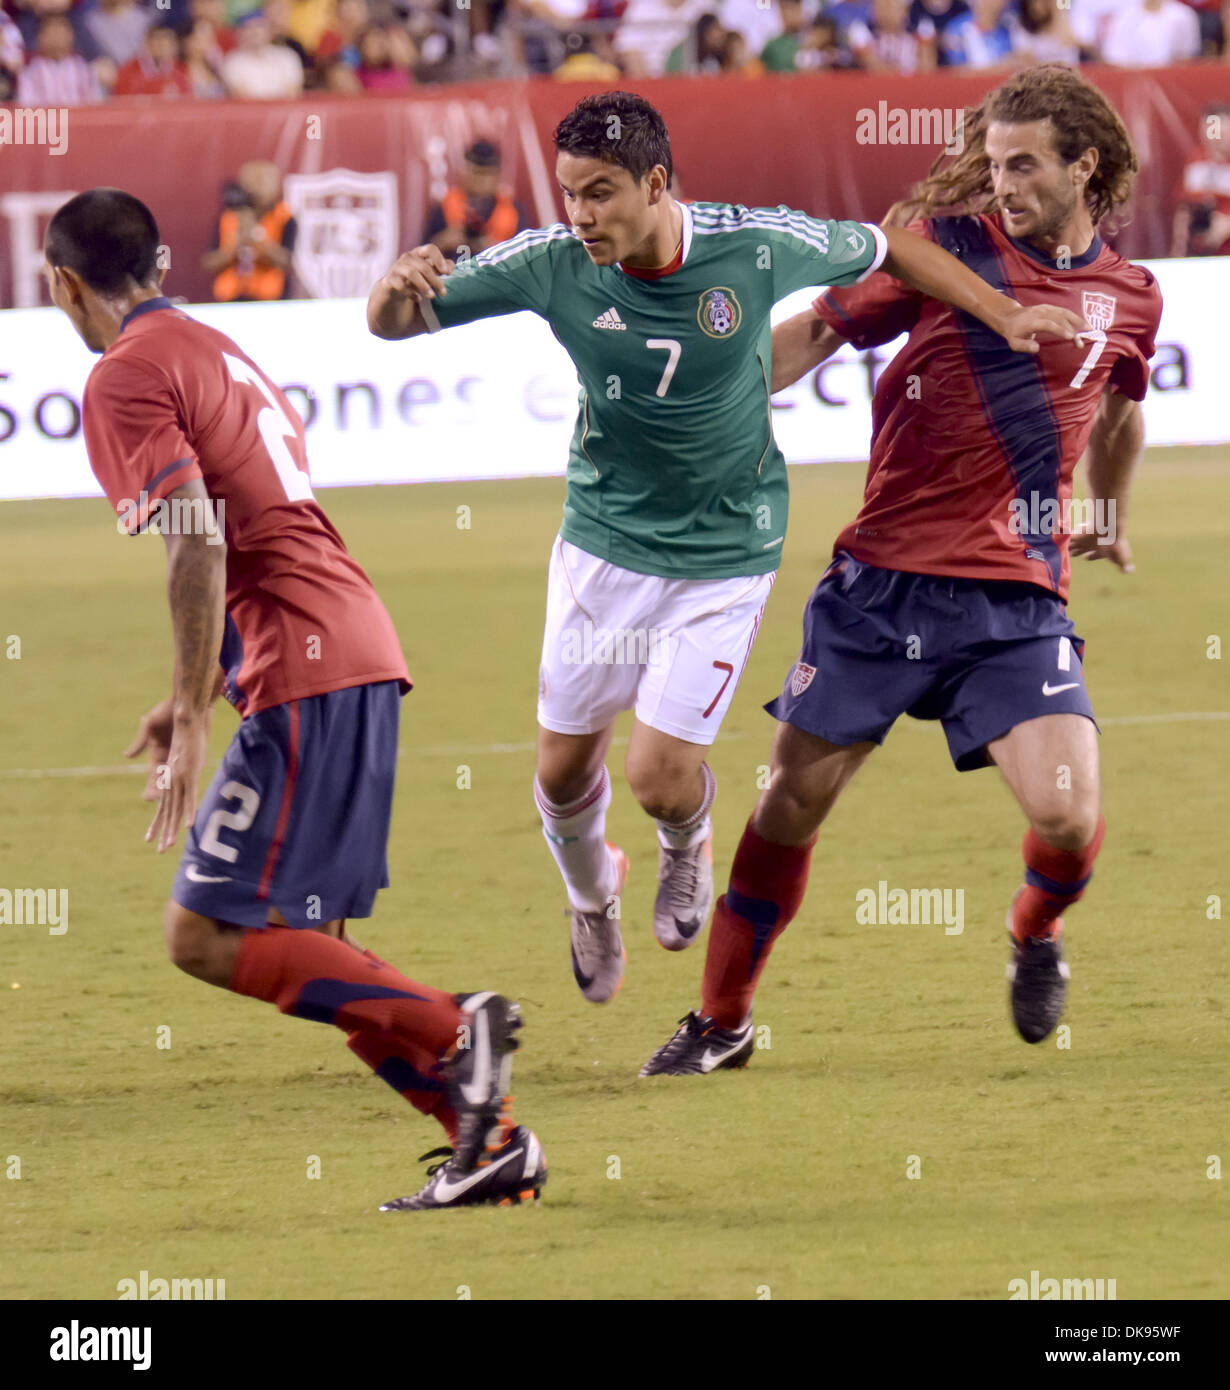 Aug. 10, 2011 - Philadelphia, PA, USA - US National Team player, KYLE BECKERMAN, fights for the ball against Mexico player, FRANCISCO JAVIER RODRIGUEZ, during a friendly match with Mexico held at Lincoln Financial Field in Philadelphia Pa. (Credit Image: © Ricky Fitchett/ZUMAPRESS.com) Stock Photo